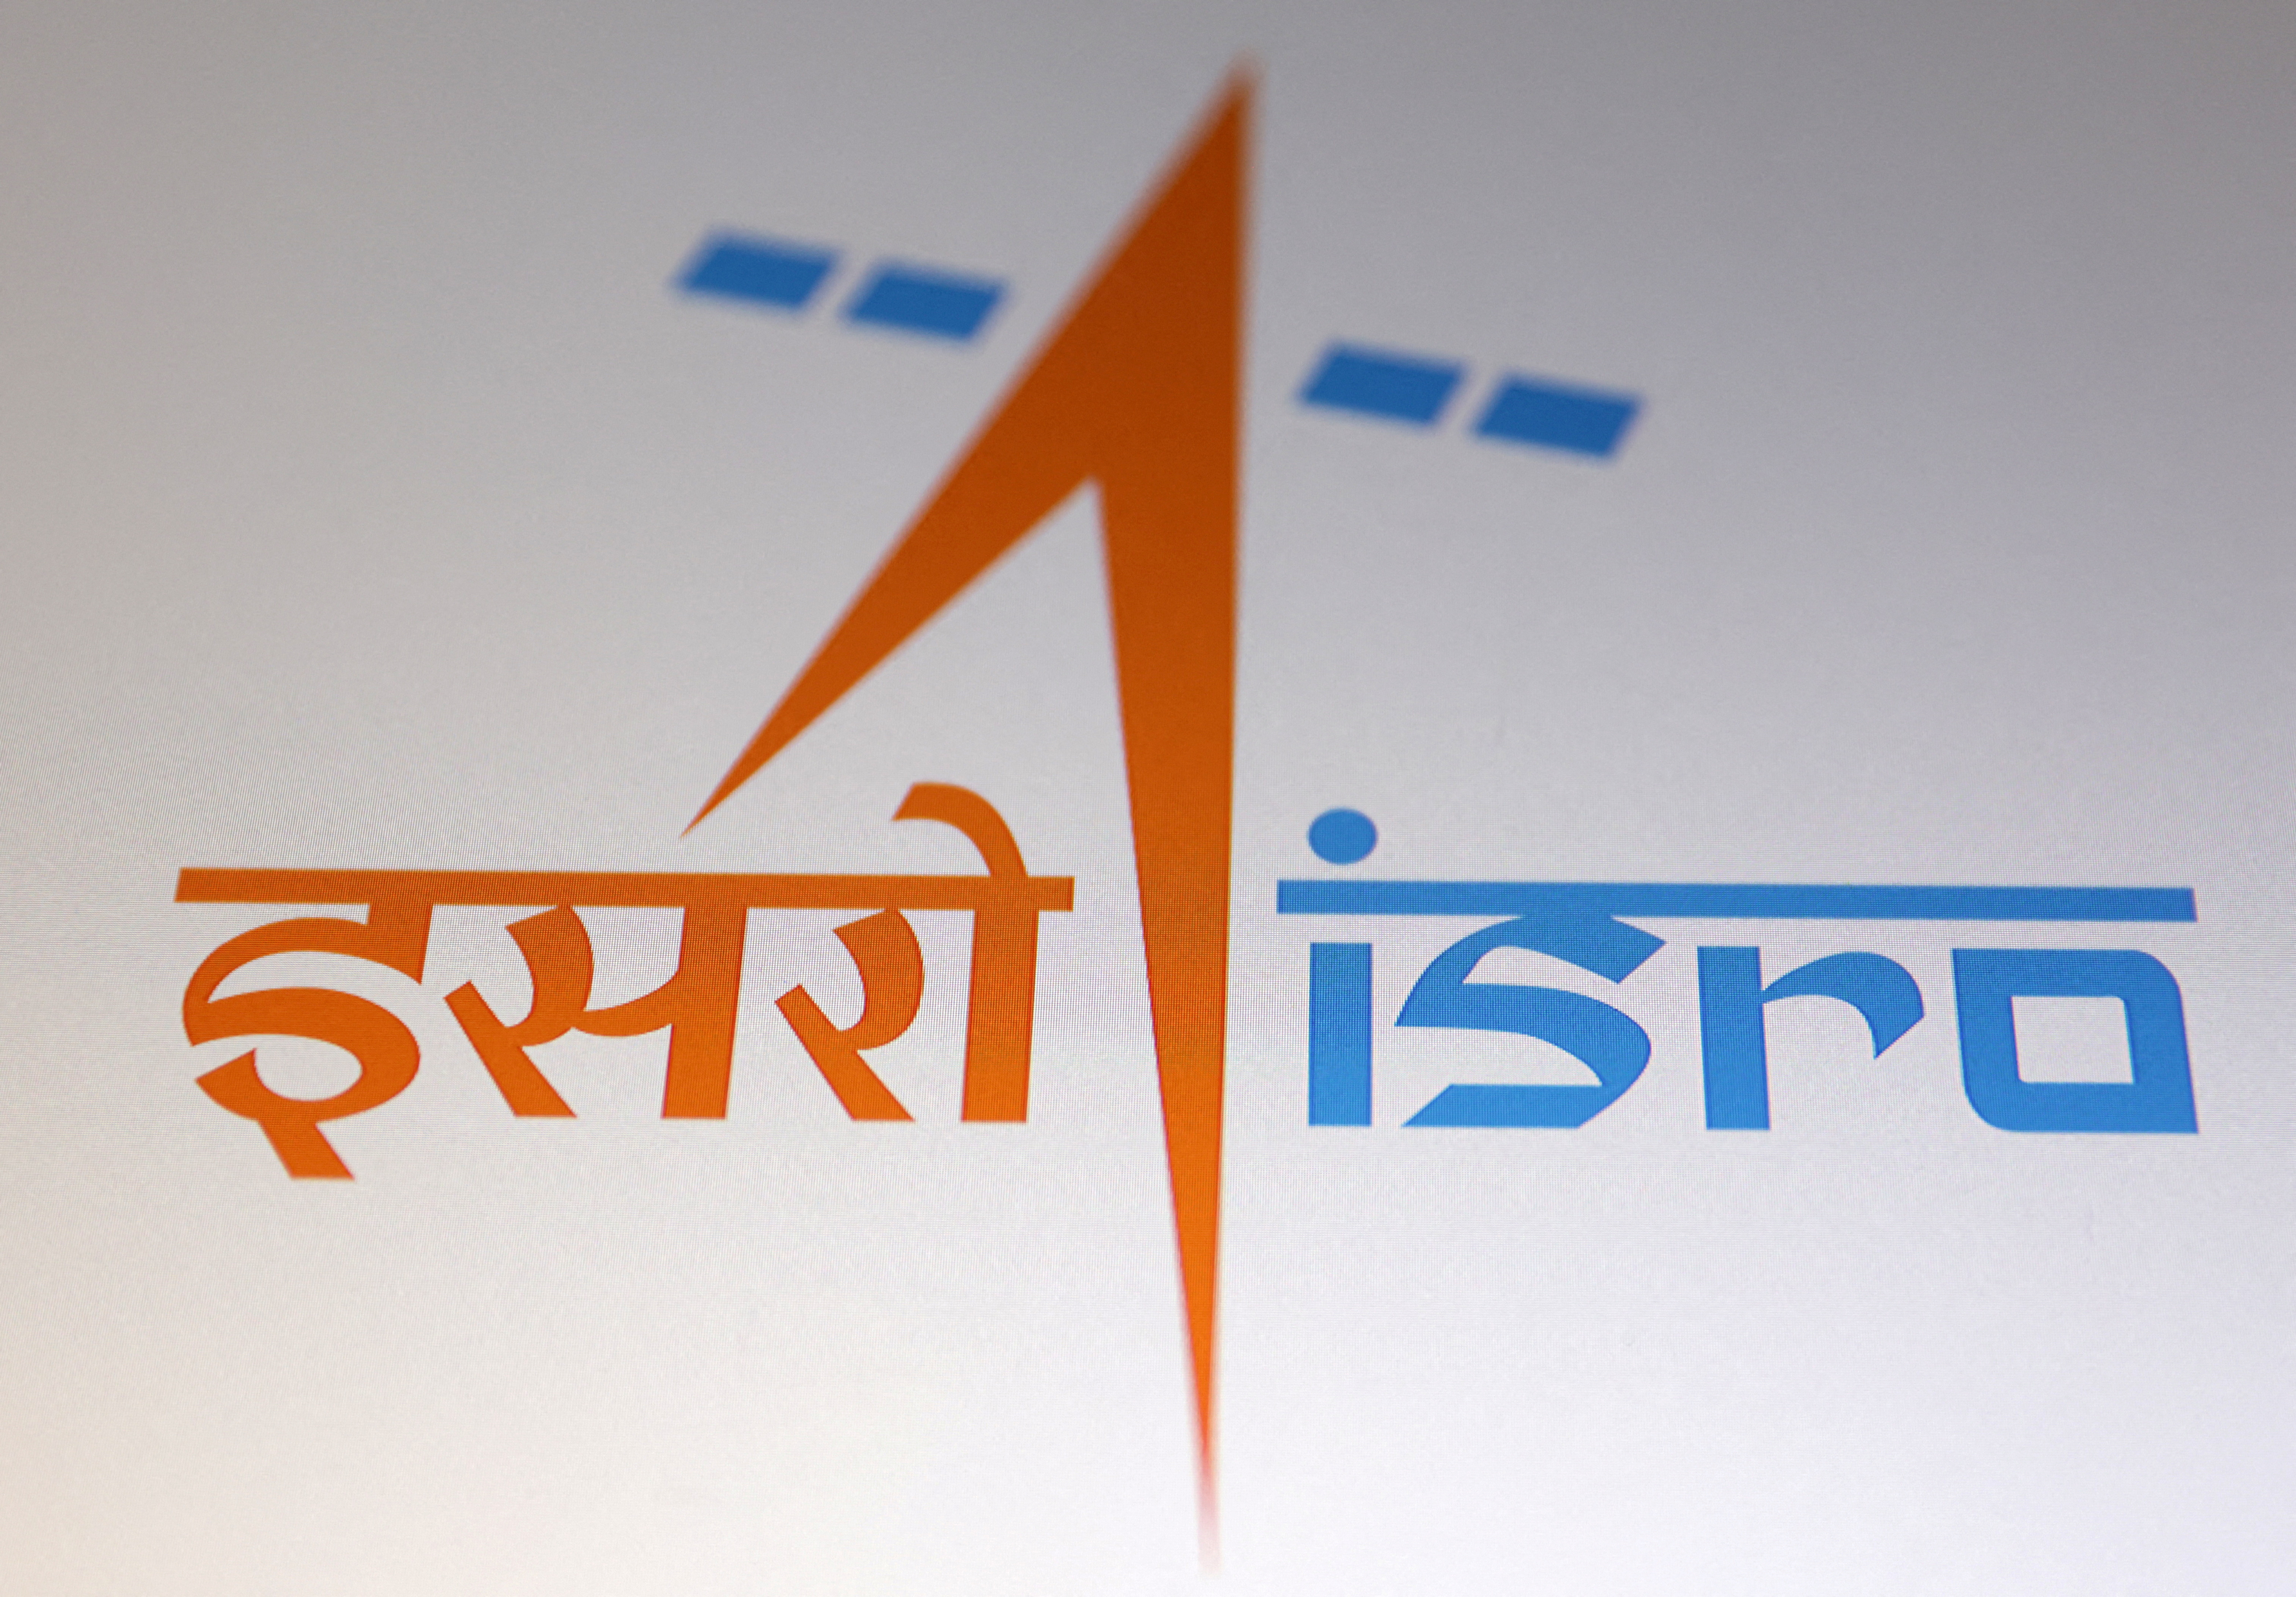 The illustration shows the logo of the Indian Space Research Organization